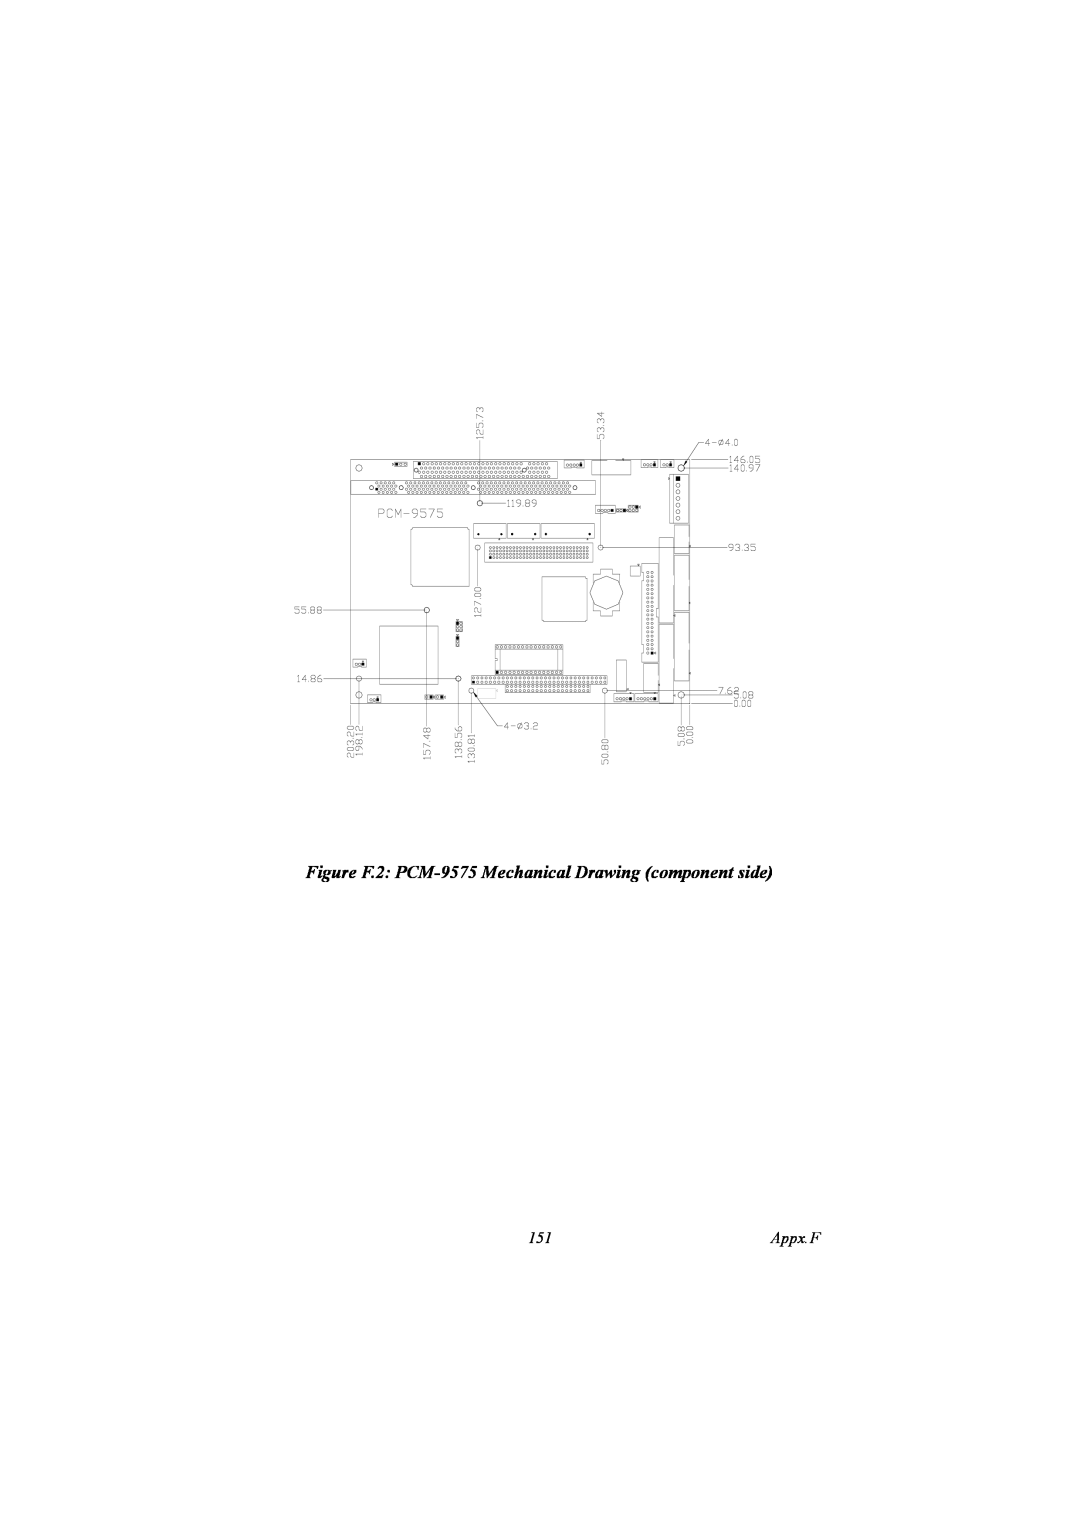 IBM 100/10 user manual Figure F.2 PCM-9575 Mechanical Drawing component side, Appx.F 